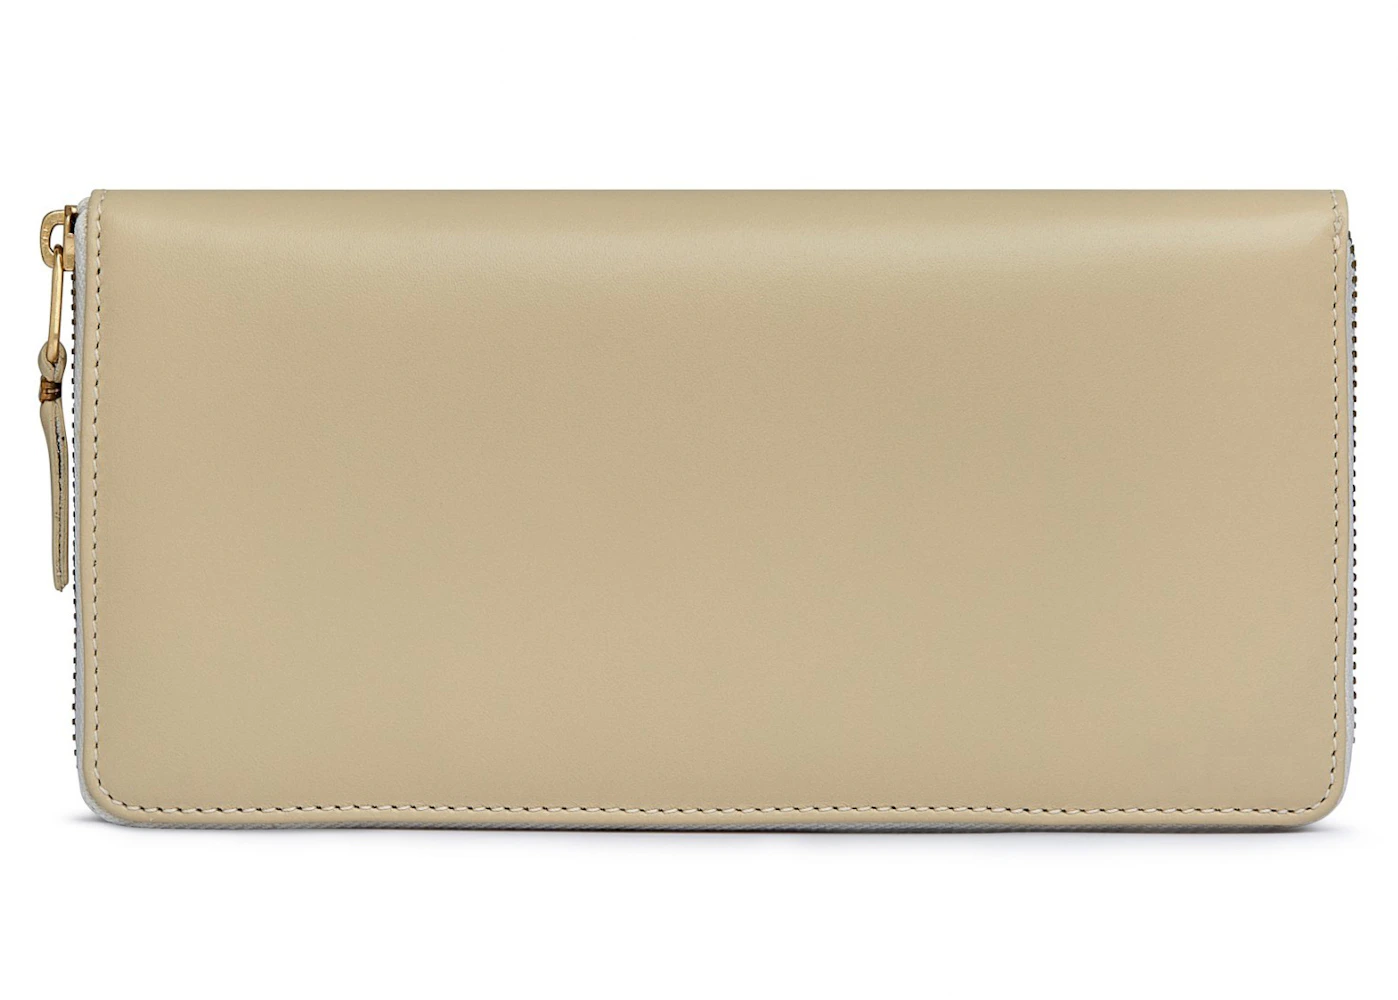 Comme des Garcons SA0110 Classic Plain Wallet Off-White in Leather with ...